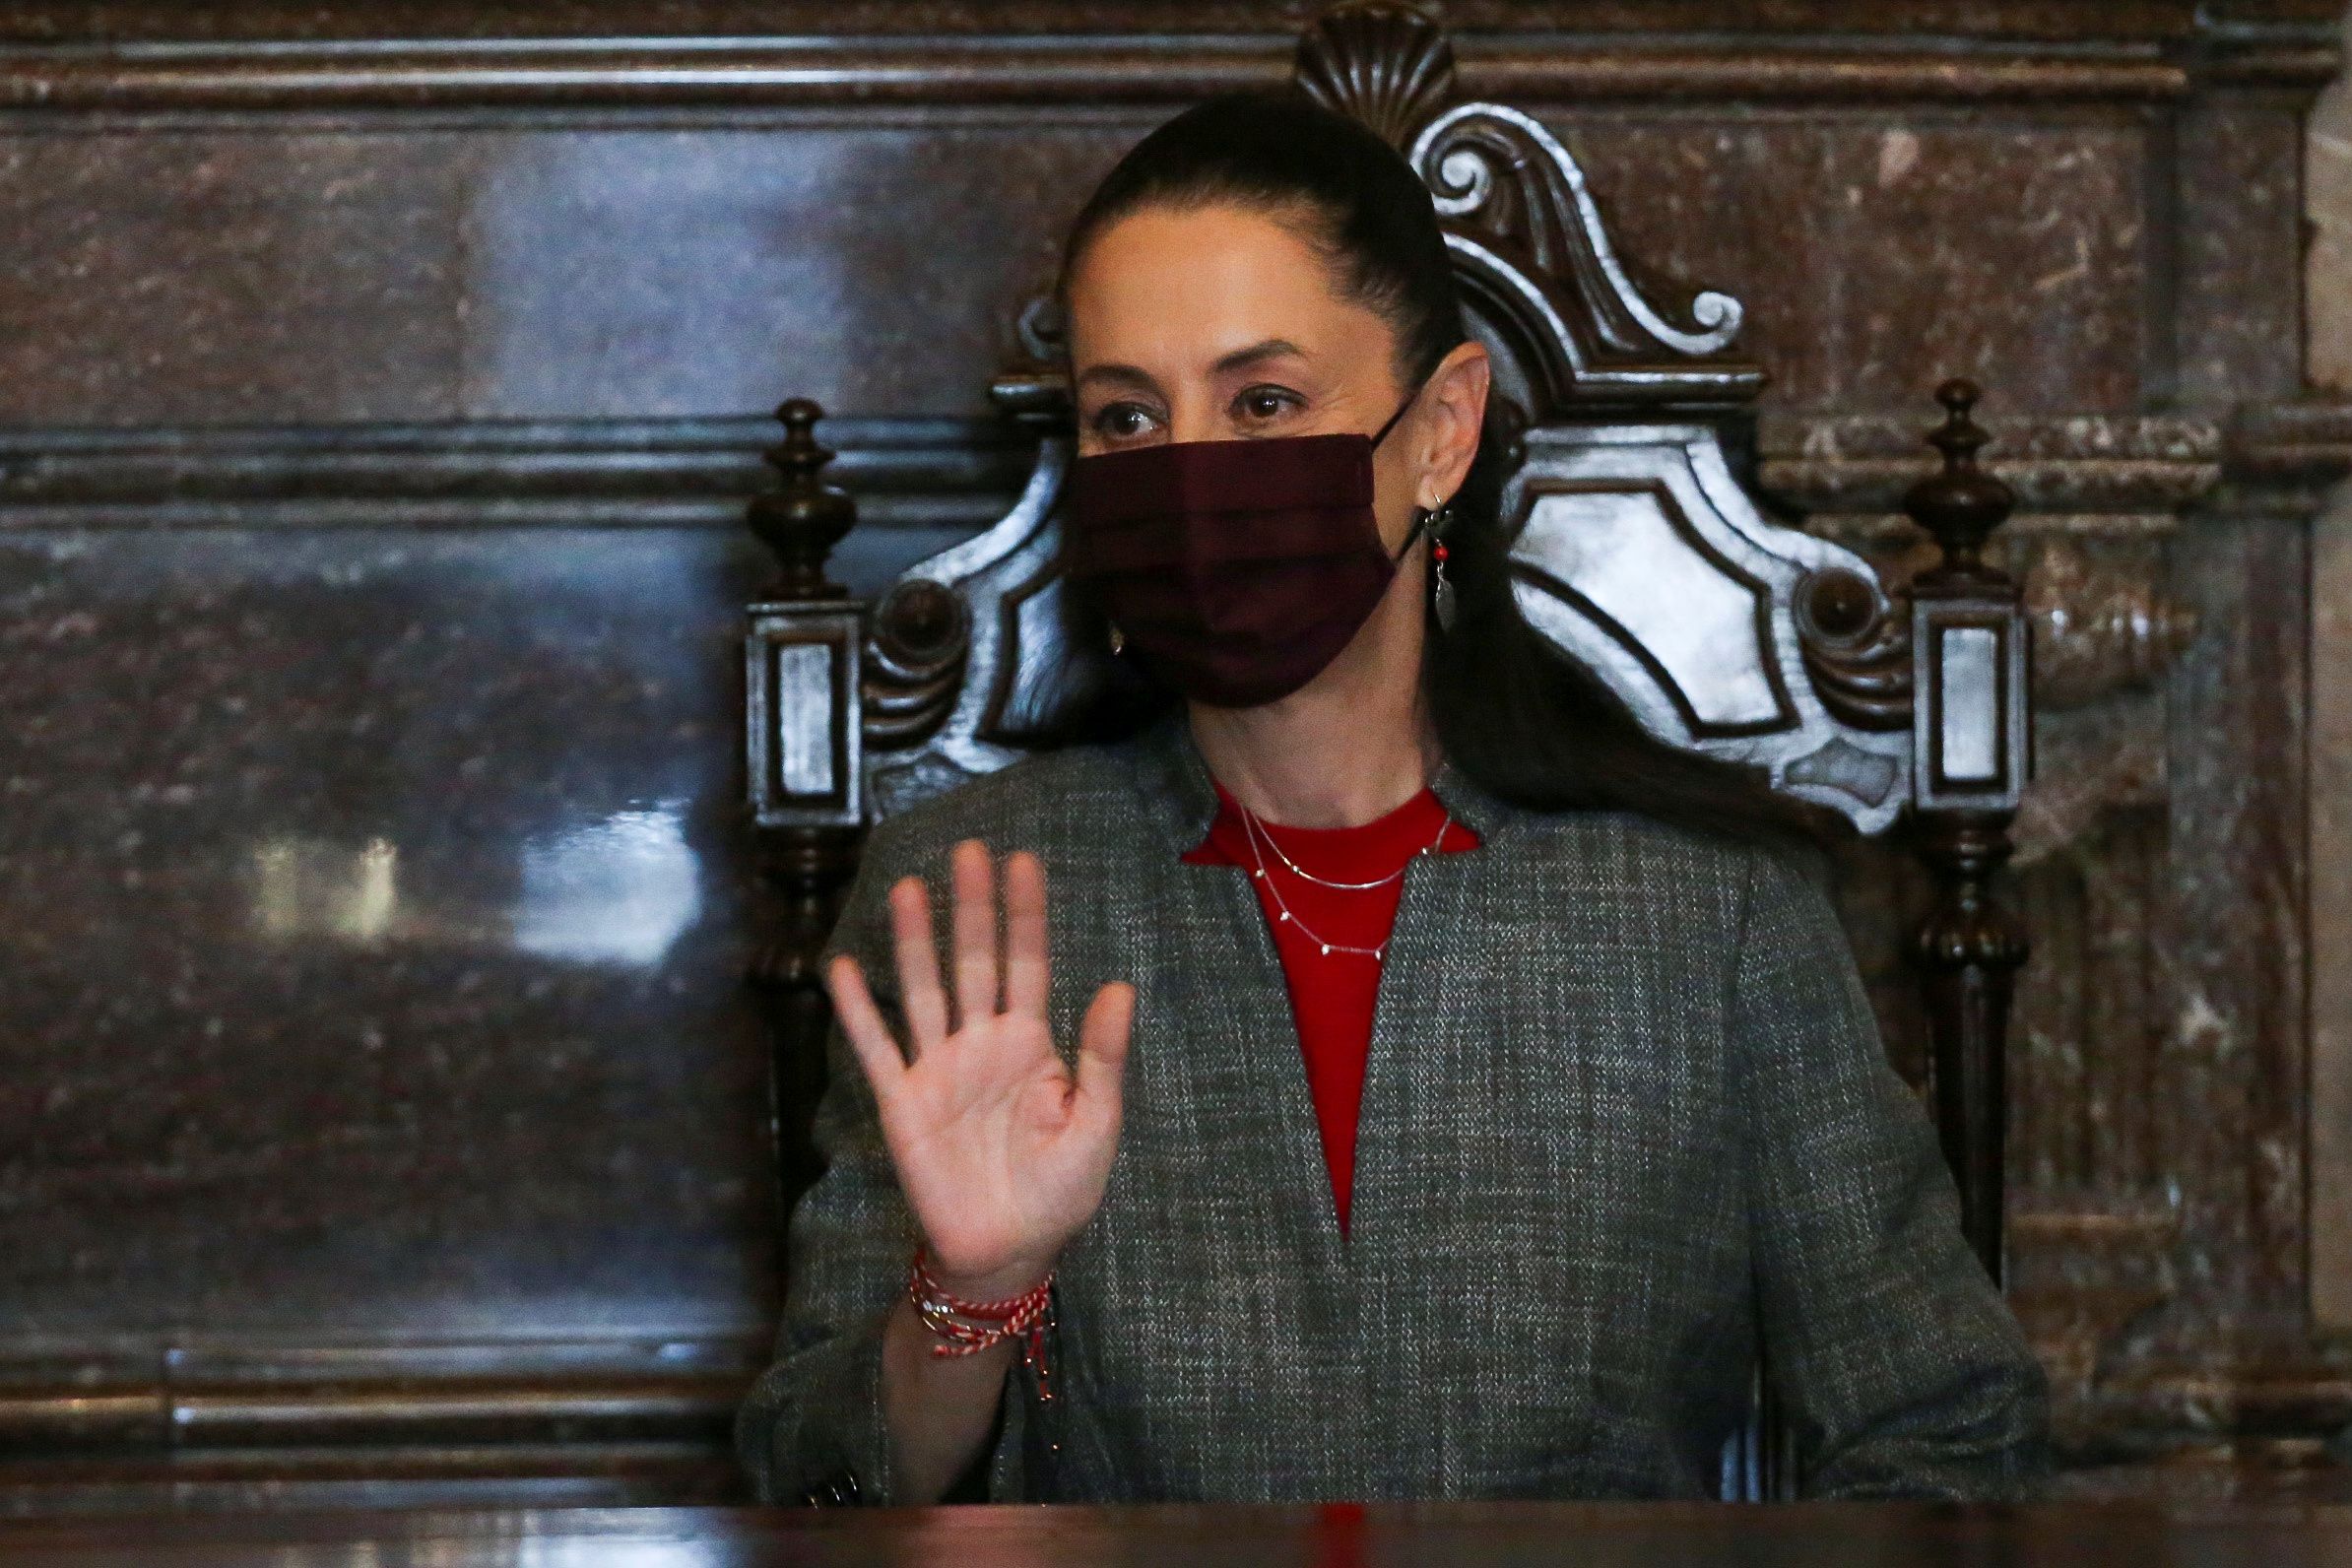 Mexico City Mayor Claudia Sheinbaum waves during a ceremony to deliver a Distinguished Guest recognition to Vatican Secretary of State Cardinal Pietro Parolin at the City Hall in Mexico City, Mexico June 21, 2021. REUTERS/Edgard Garrido